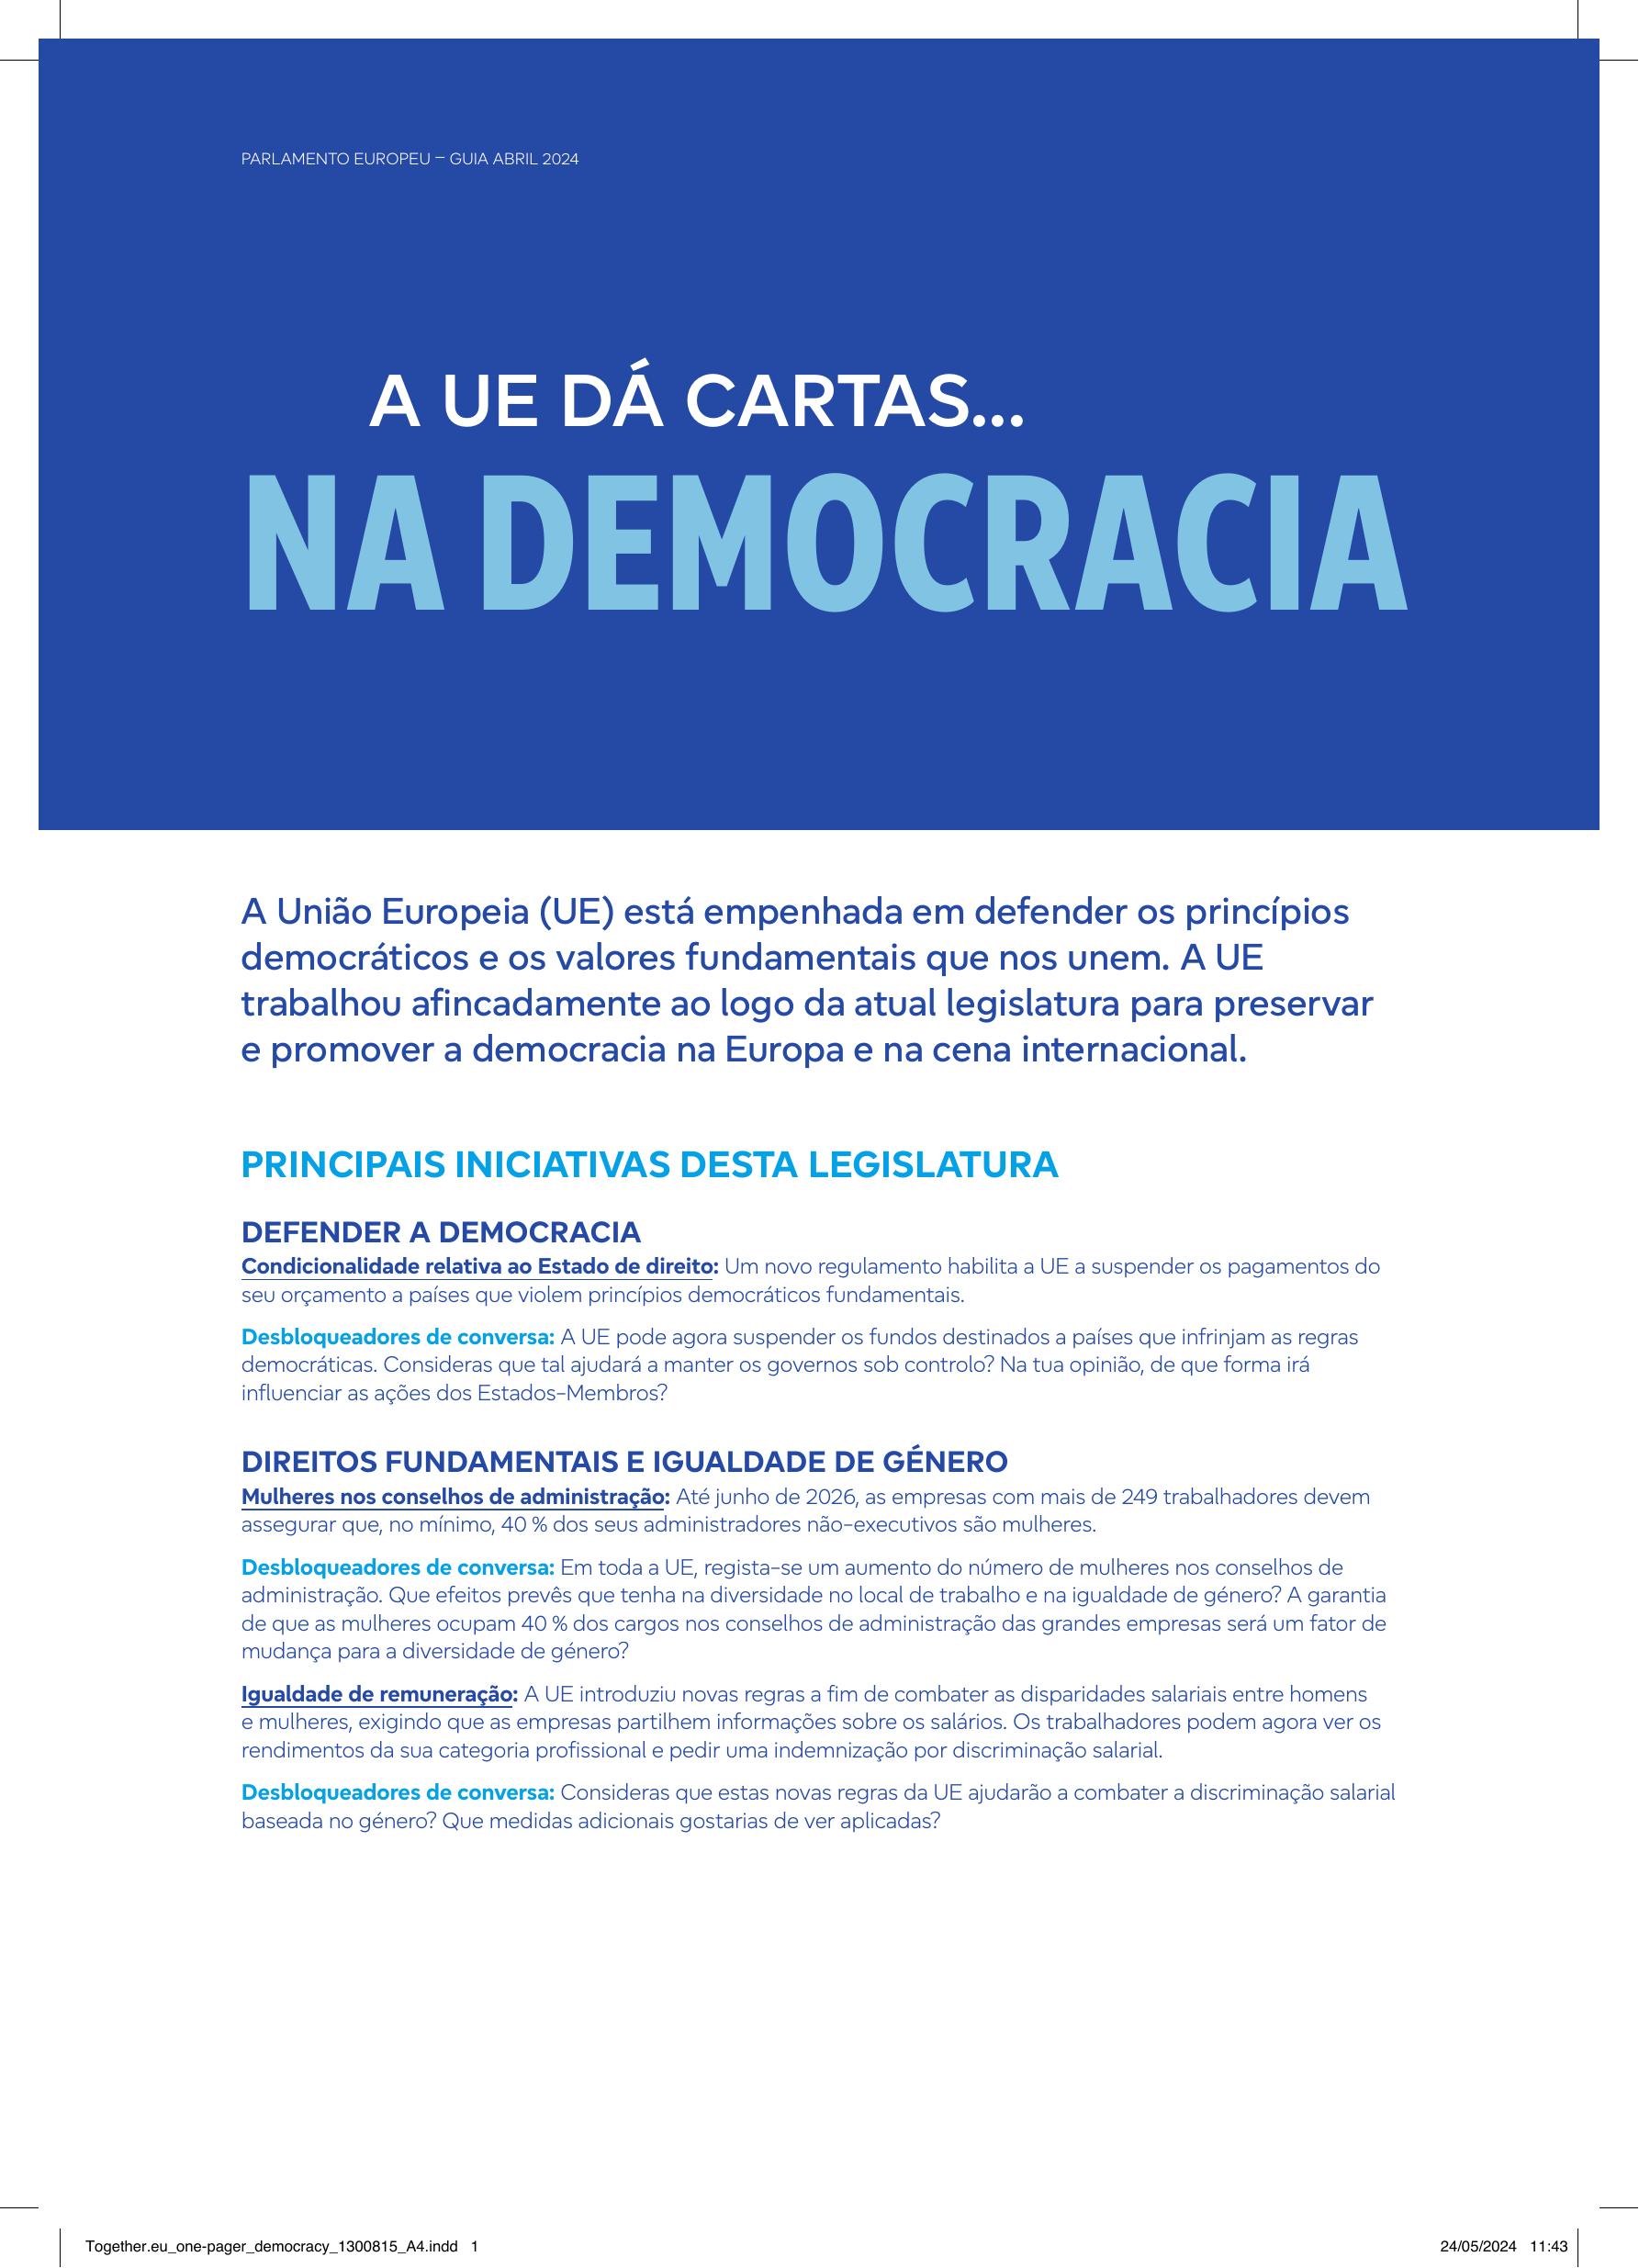 Together.eu_one-pager_democracy_print.pdf